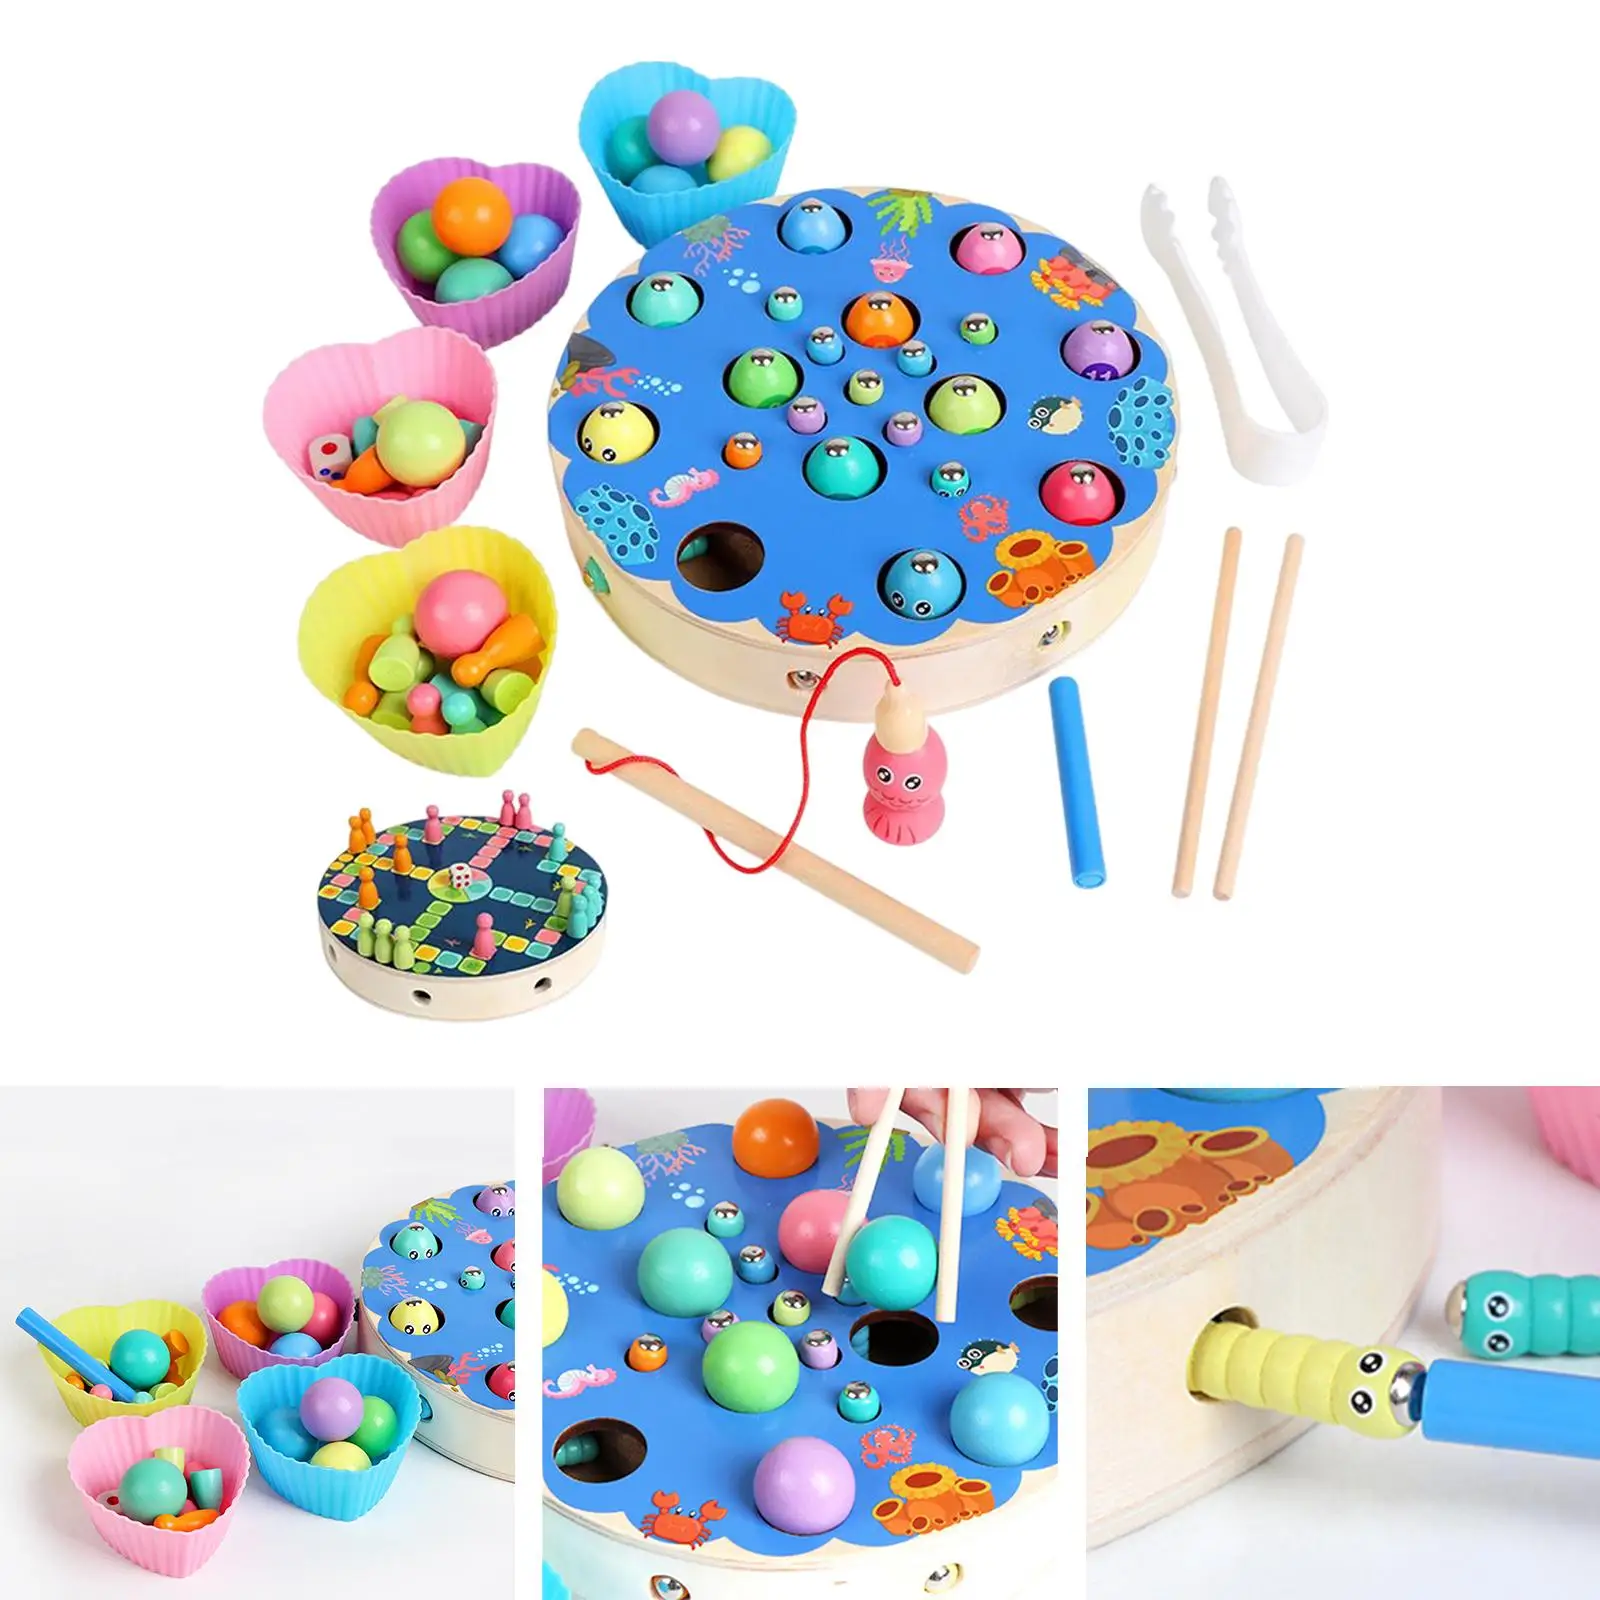 Wooden Fishing Game Fishing Pole Multicolor Chopsticks for Birthday Gift